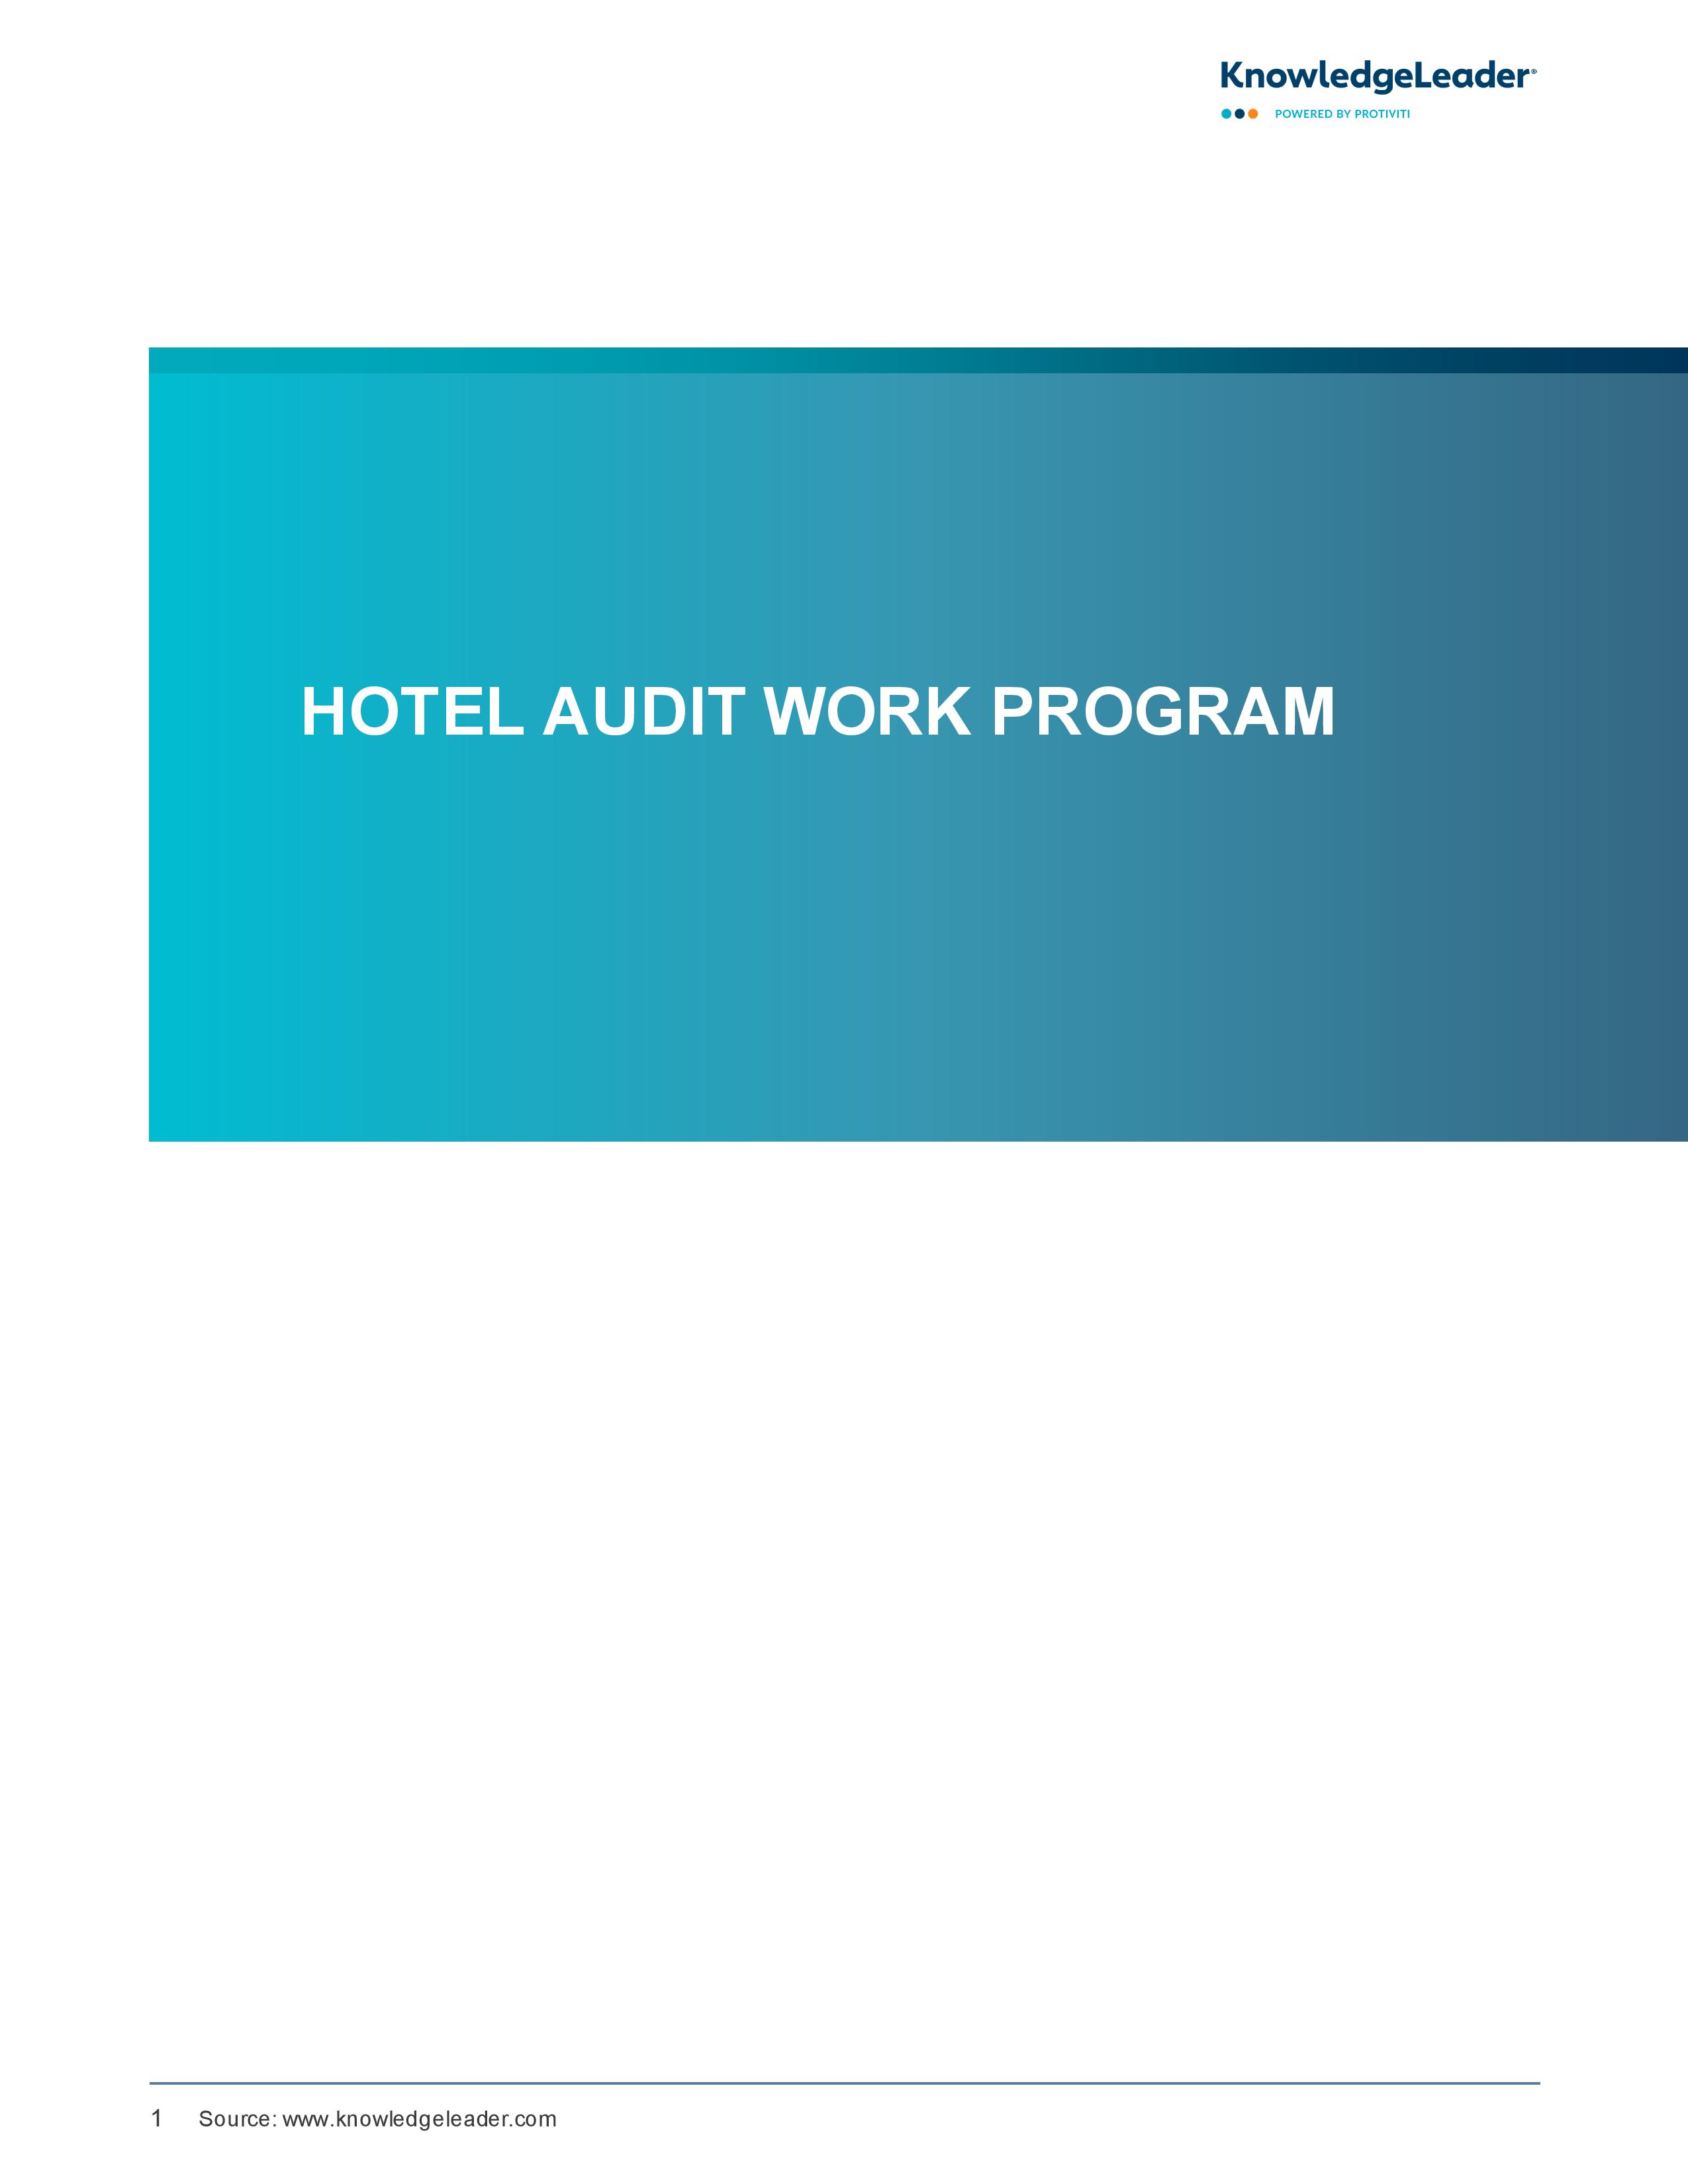 screenshot of the first page of Hotel Audit Work Program 